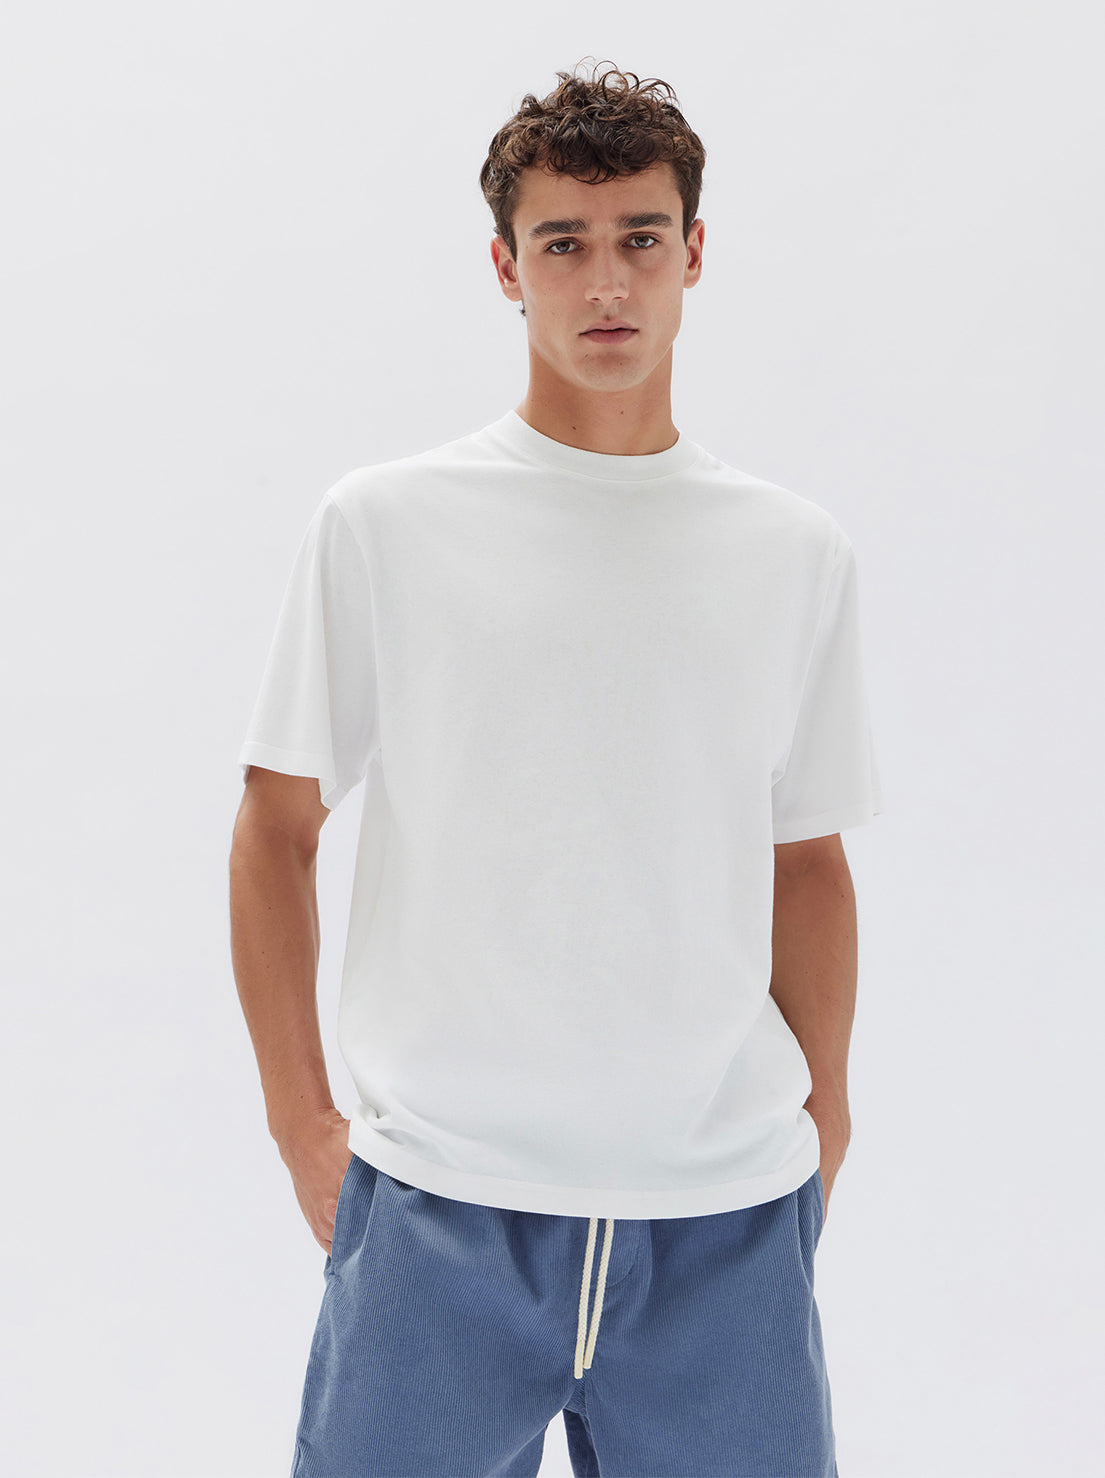 Assembly - Knox Organic Oversized Tee - Antique White